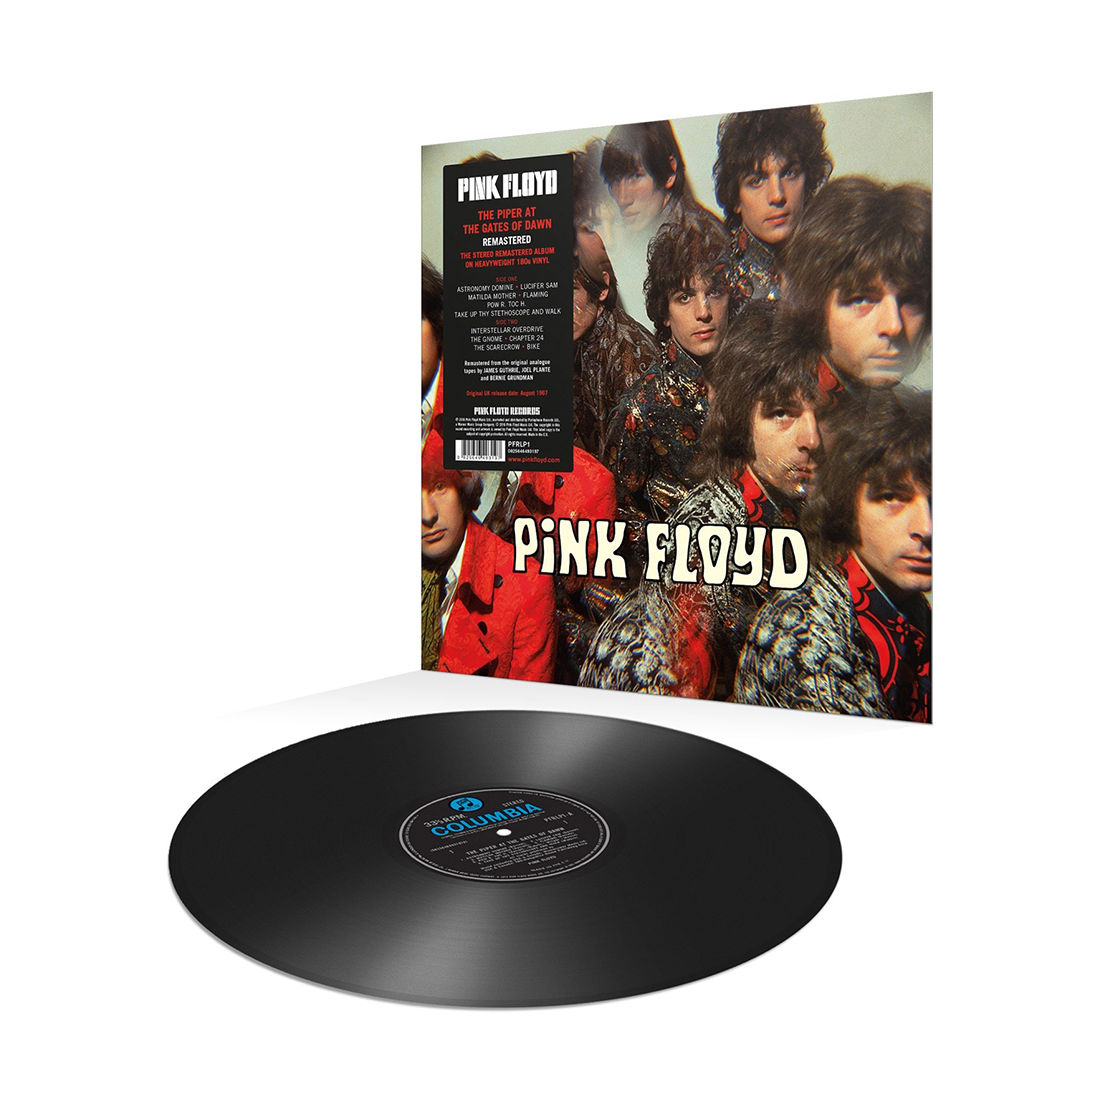 Pink Floyd - The Piper at the Gates of Dawn: Vinyl LP